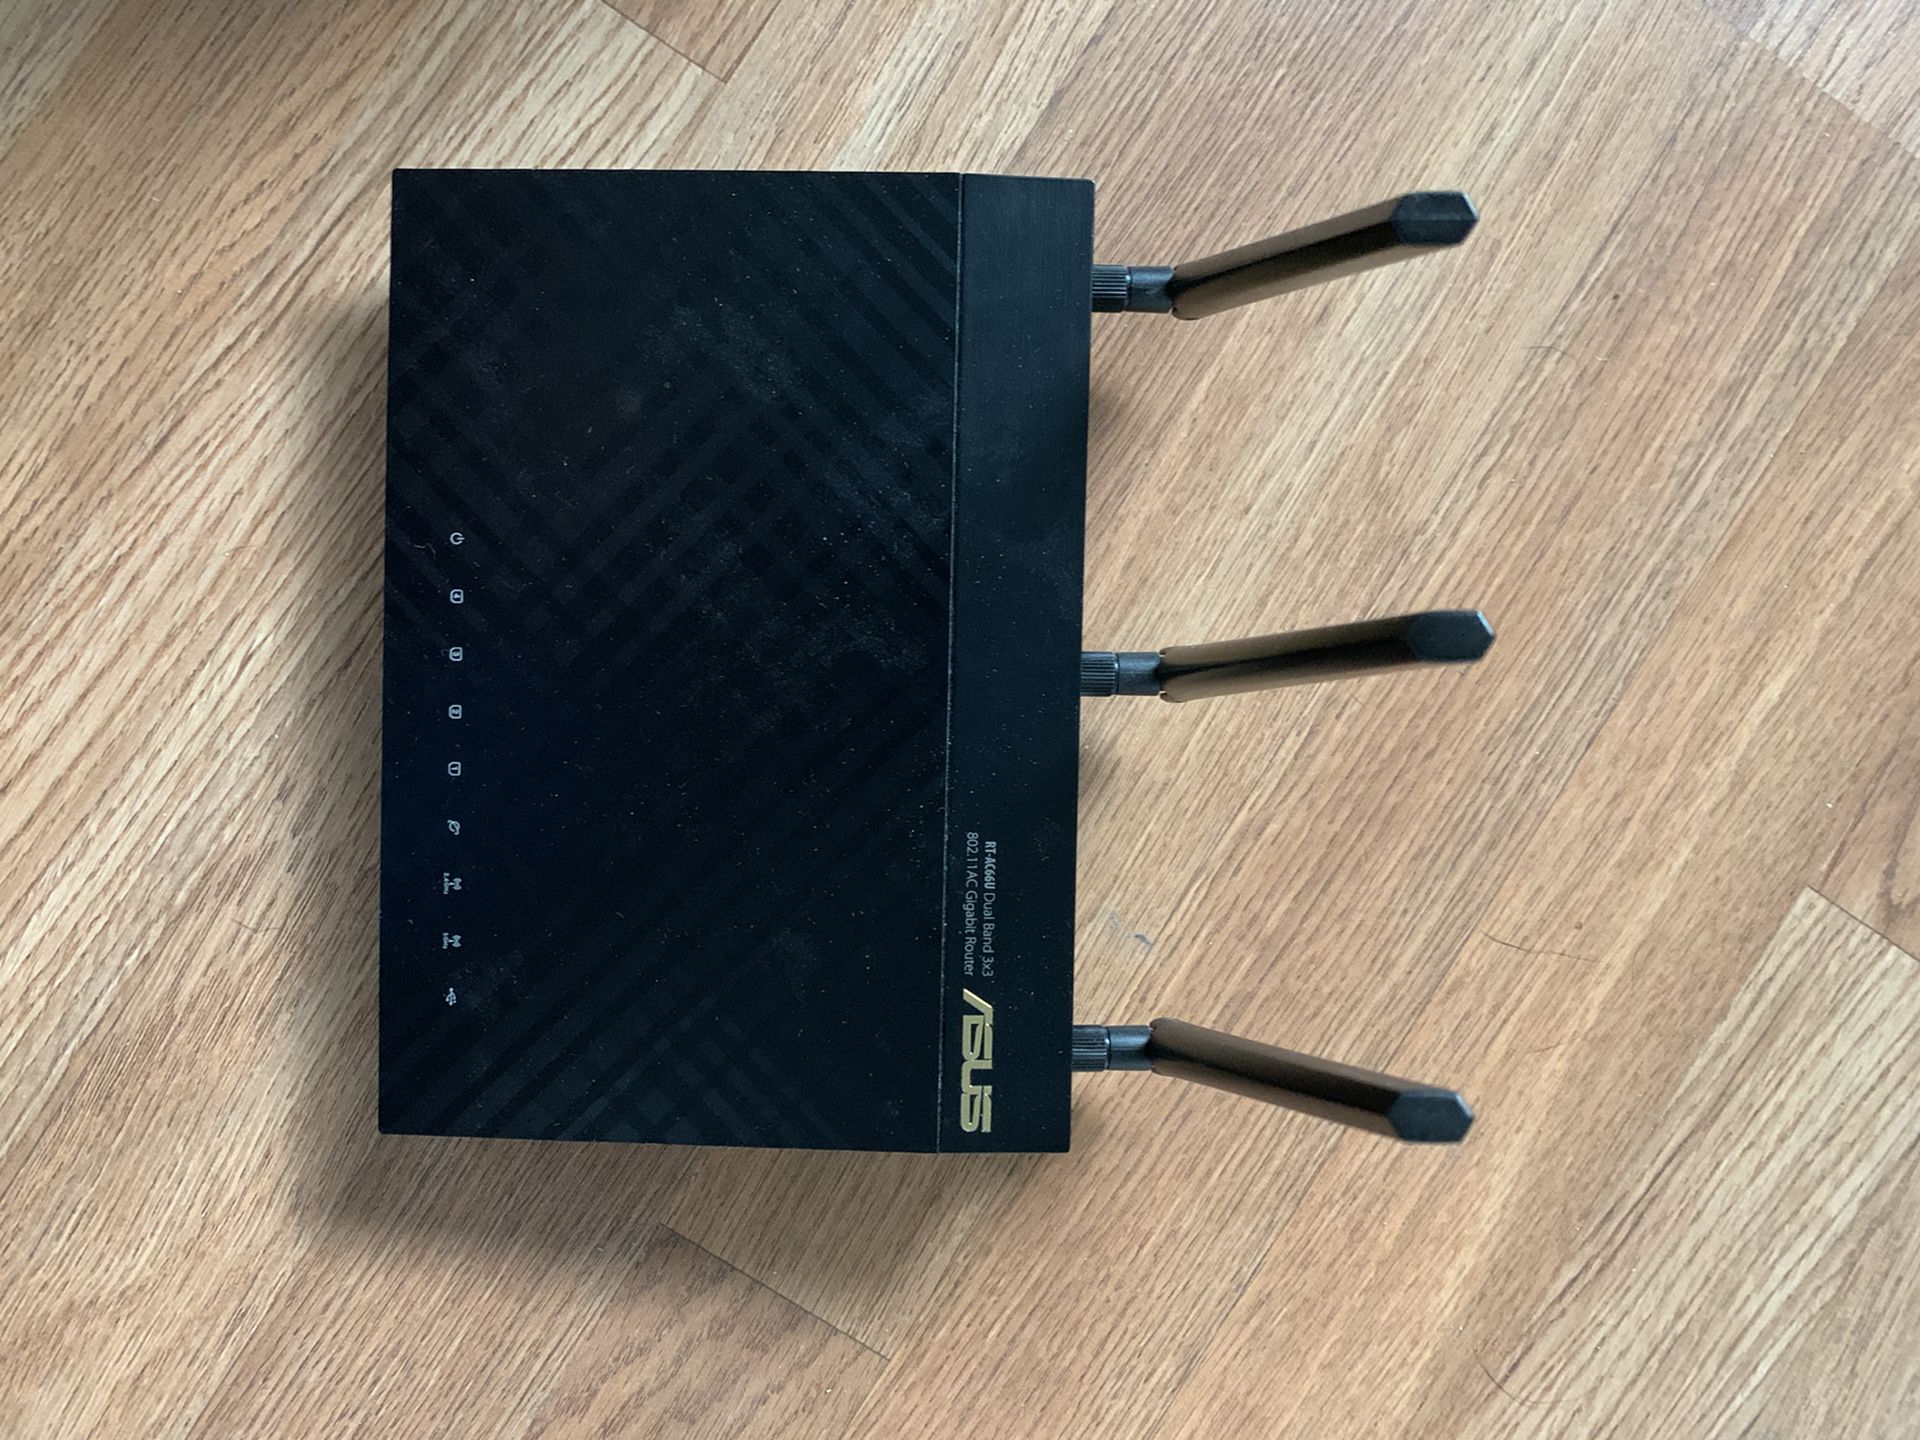 ASUS dual band wifi router